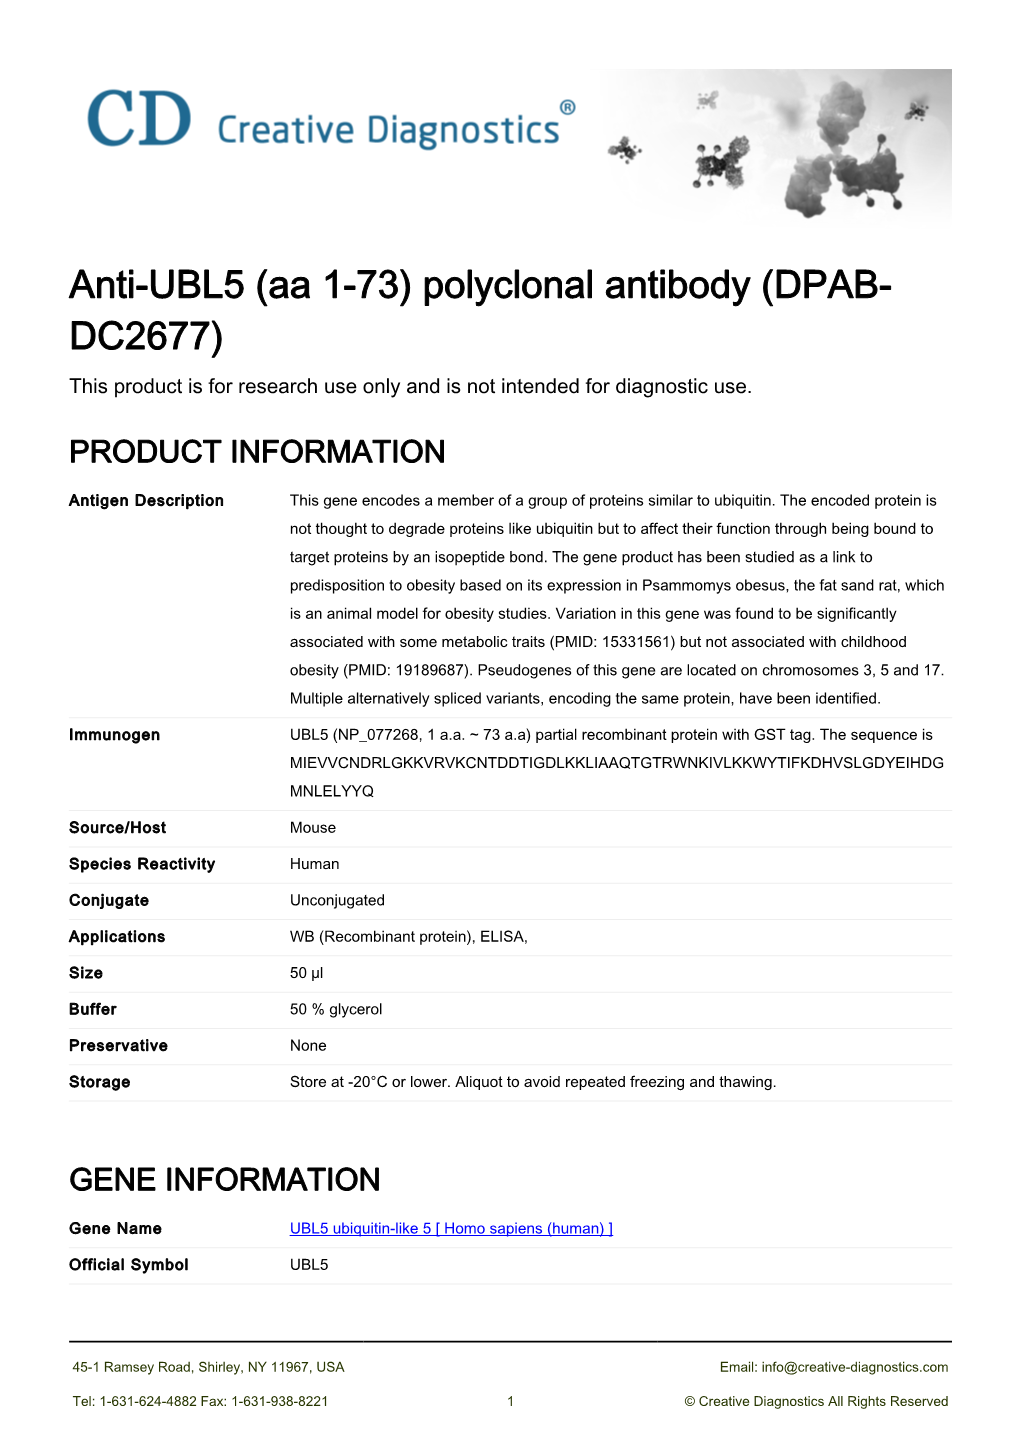 Anti-UBL5 (Aa 1-73) Polyclonal Antibody (DPAB- DC2677) This Product Is for Research Use Only and Is Not Intended for Diagnostic Use